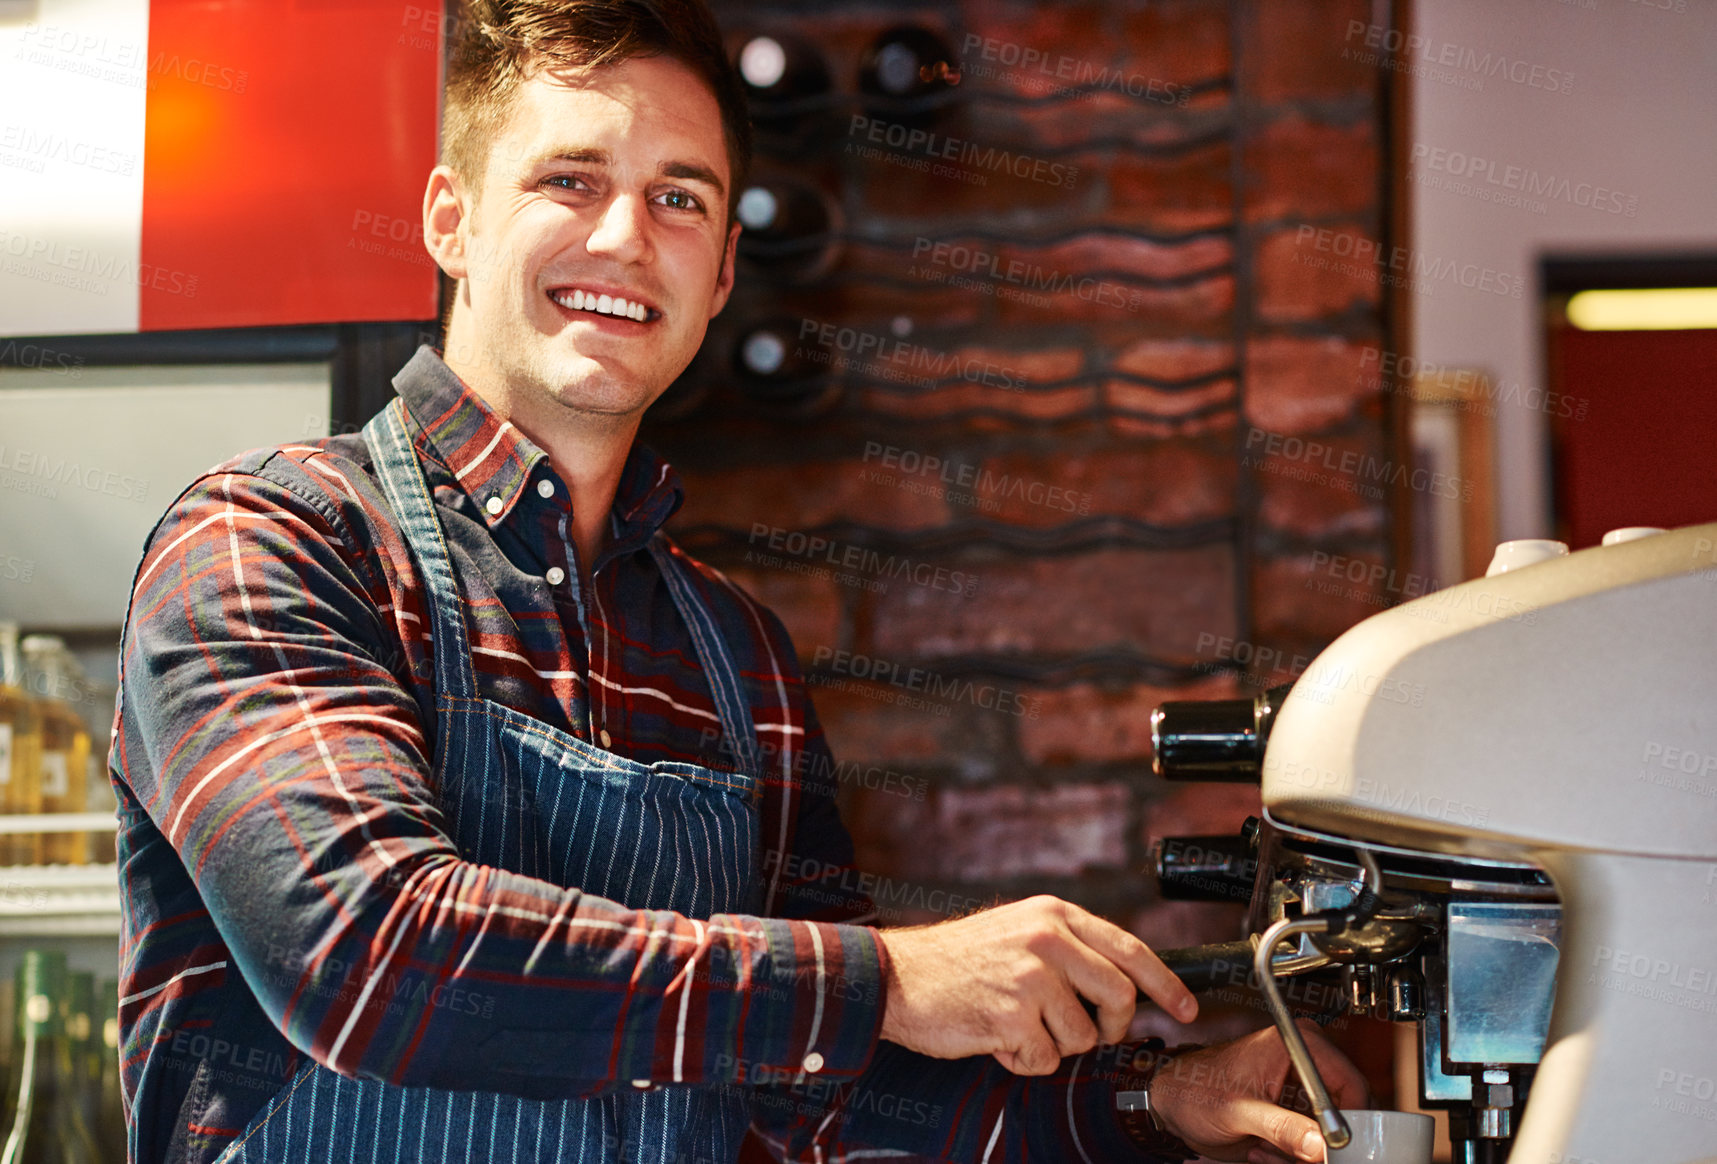 Buy stock photo Portrait of a barista operating a coffee machine in a cafe